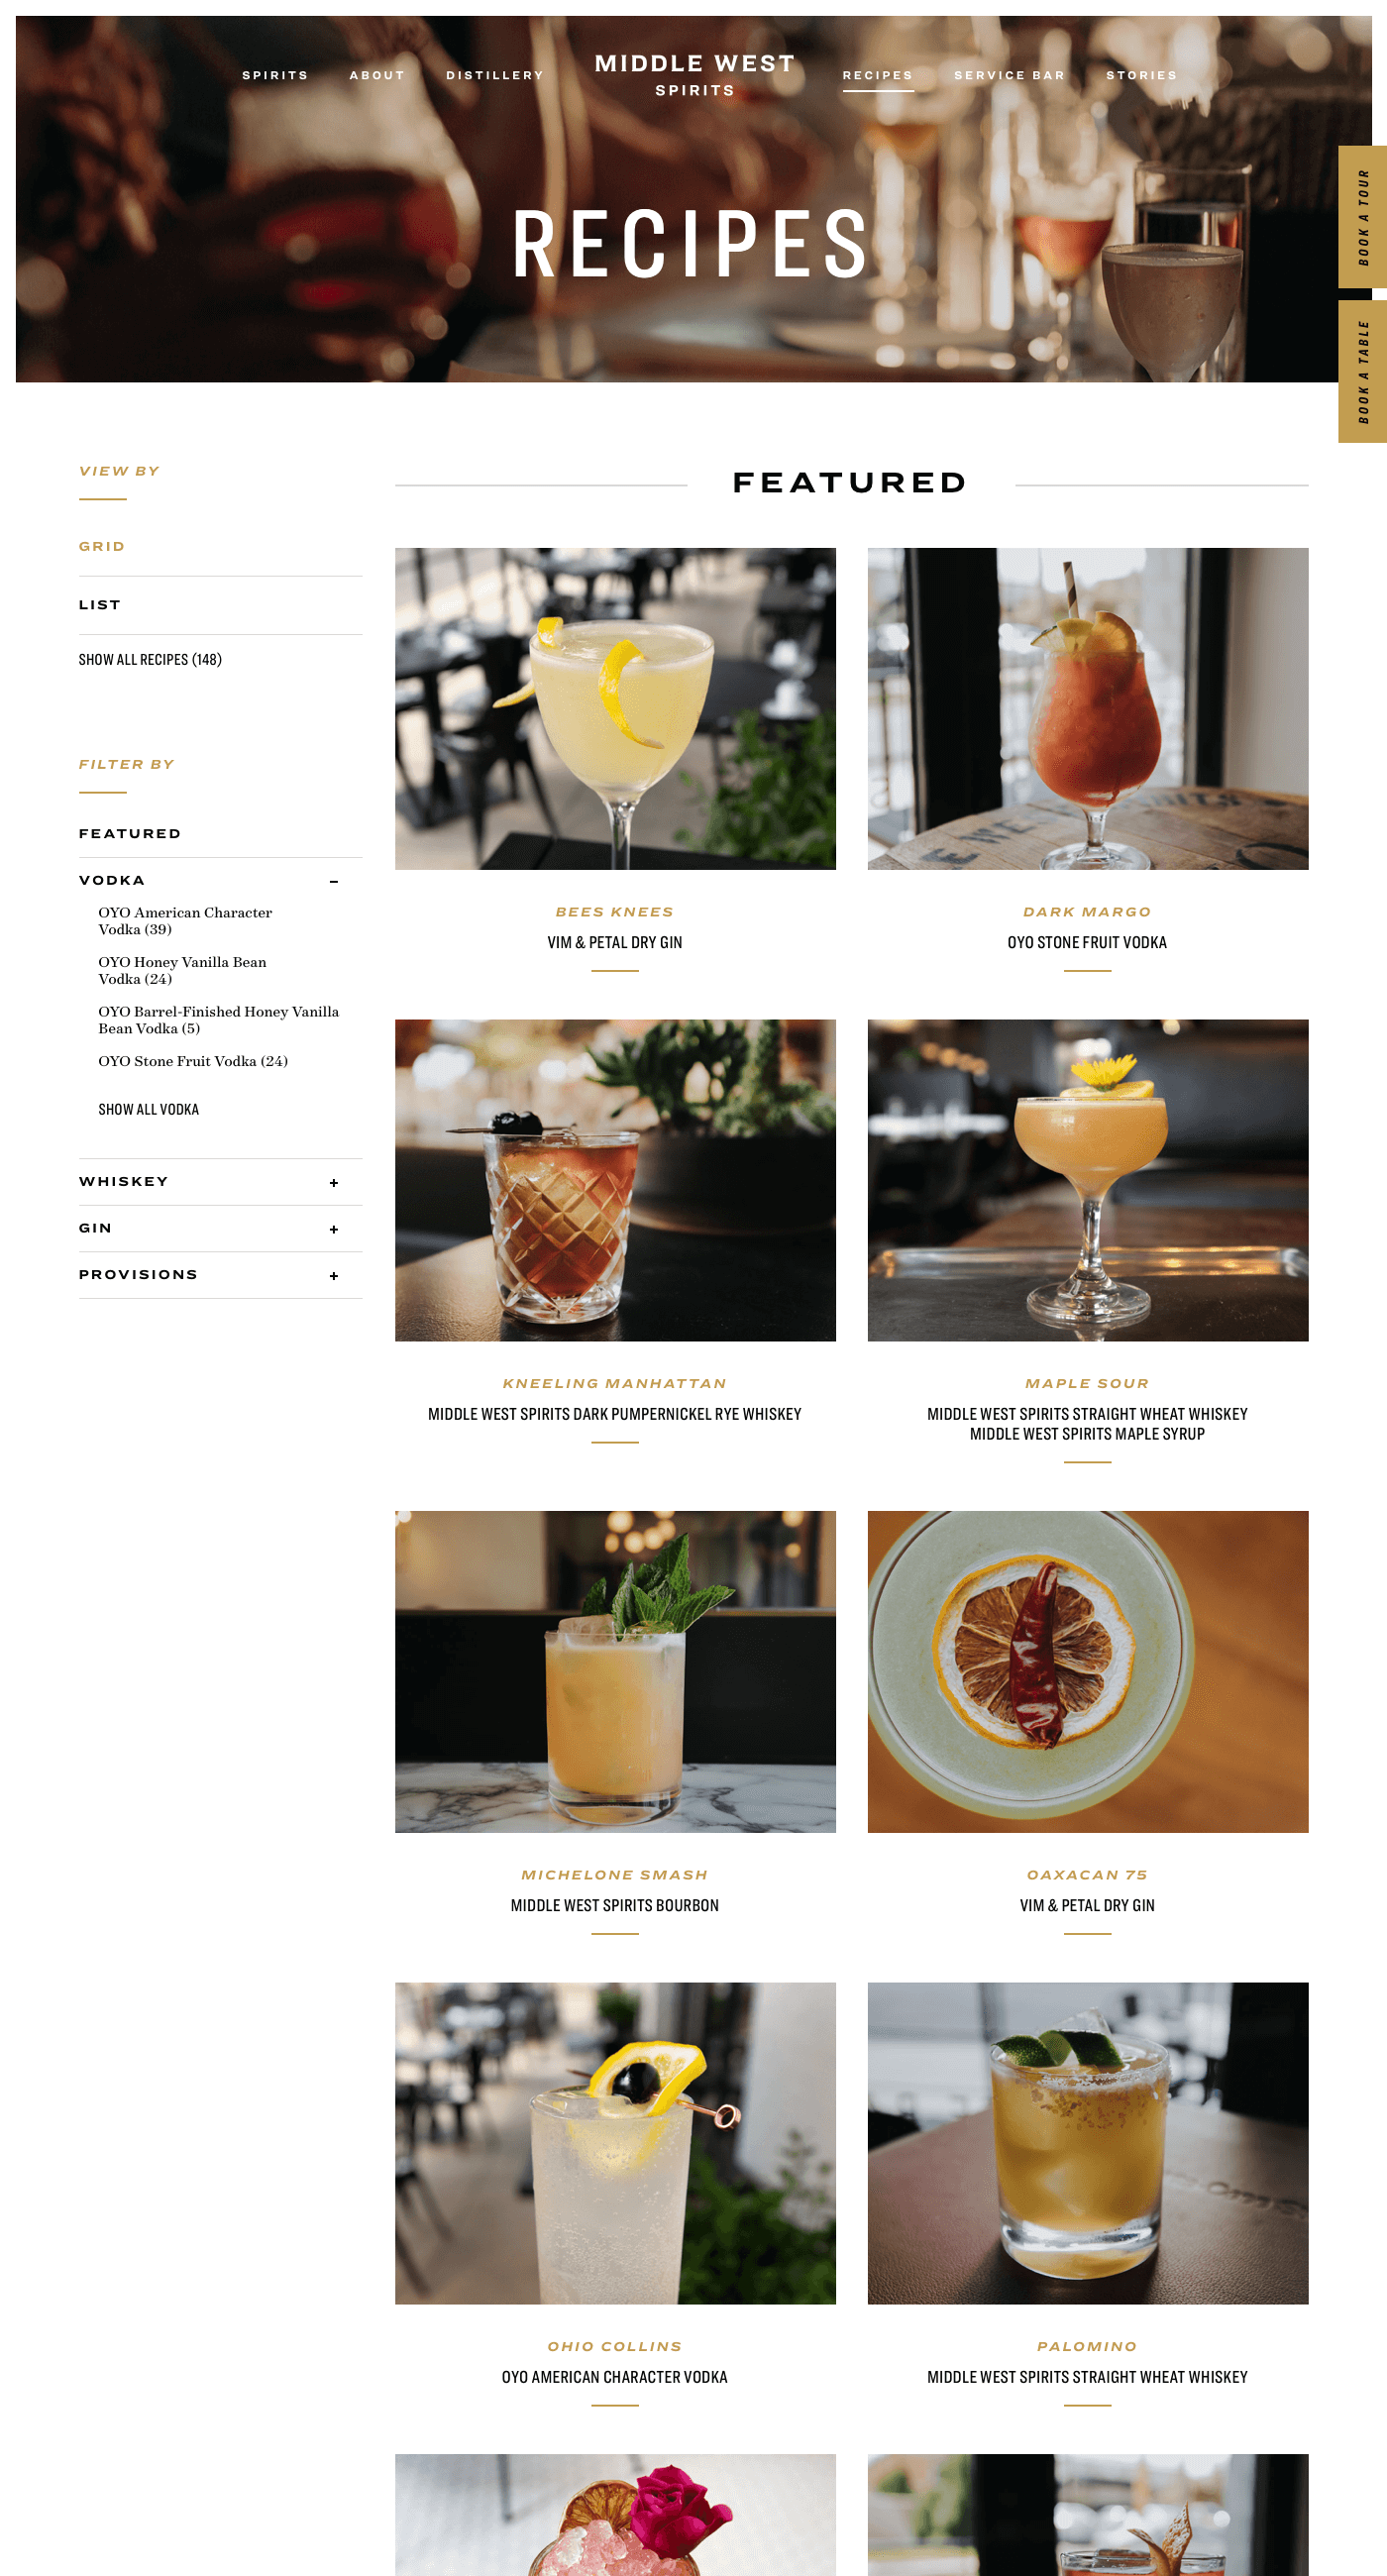 Middle West Spirits recipes page